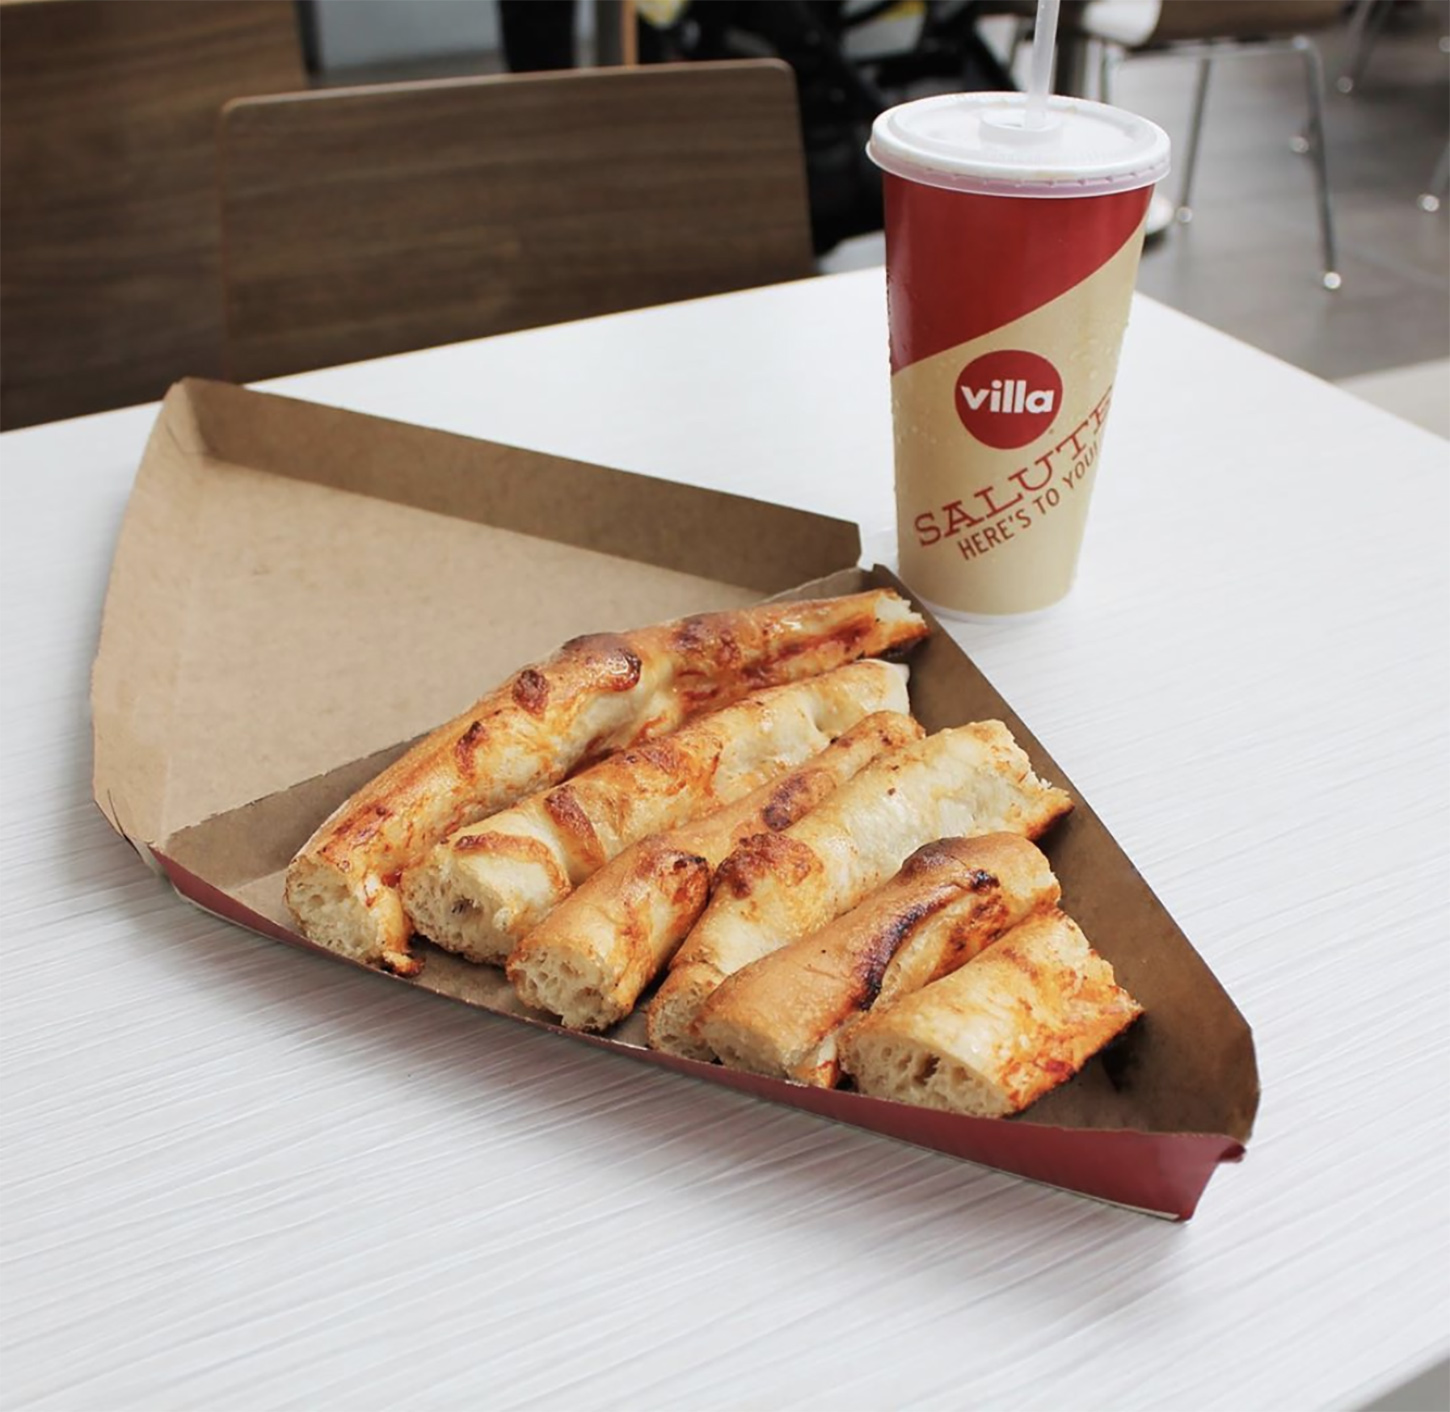 This Pizza Chain Is Selling A Box Of Just Crusts